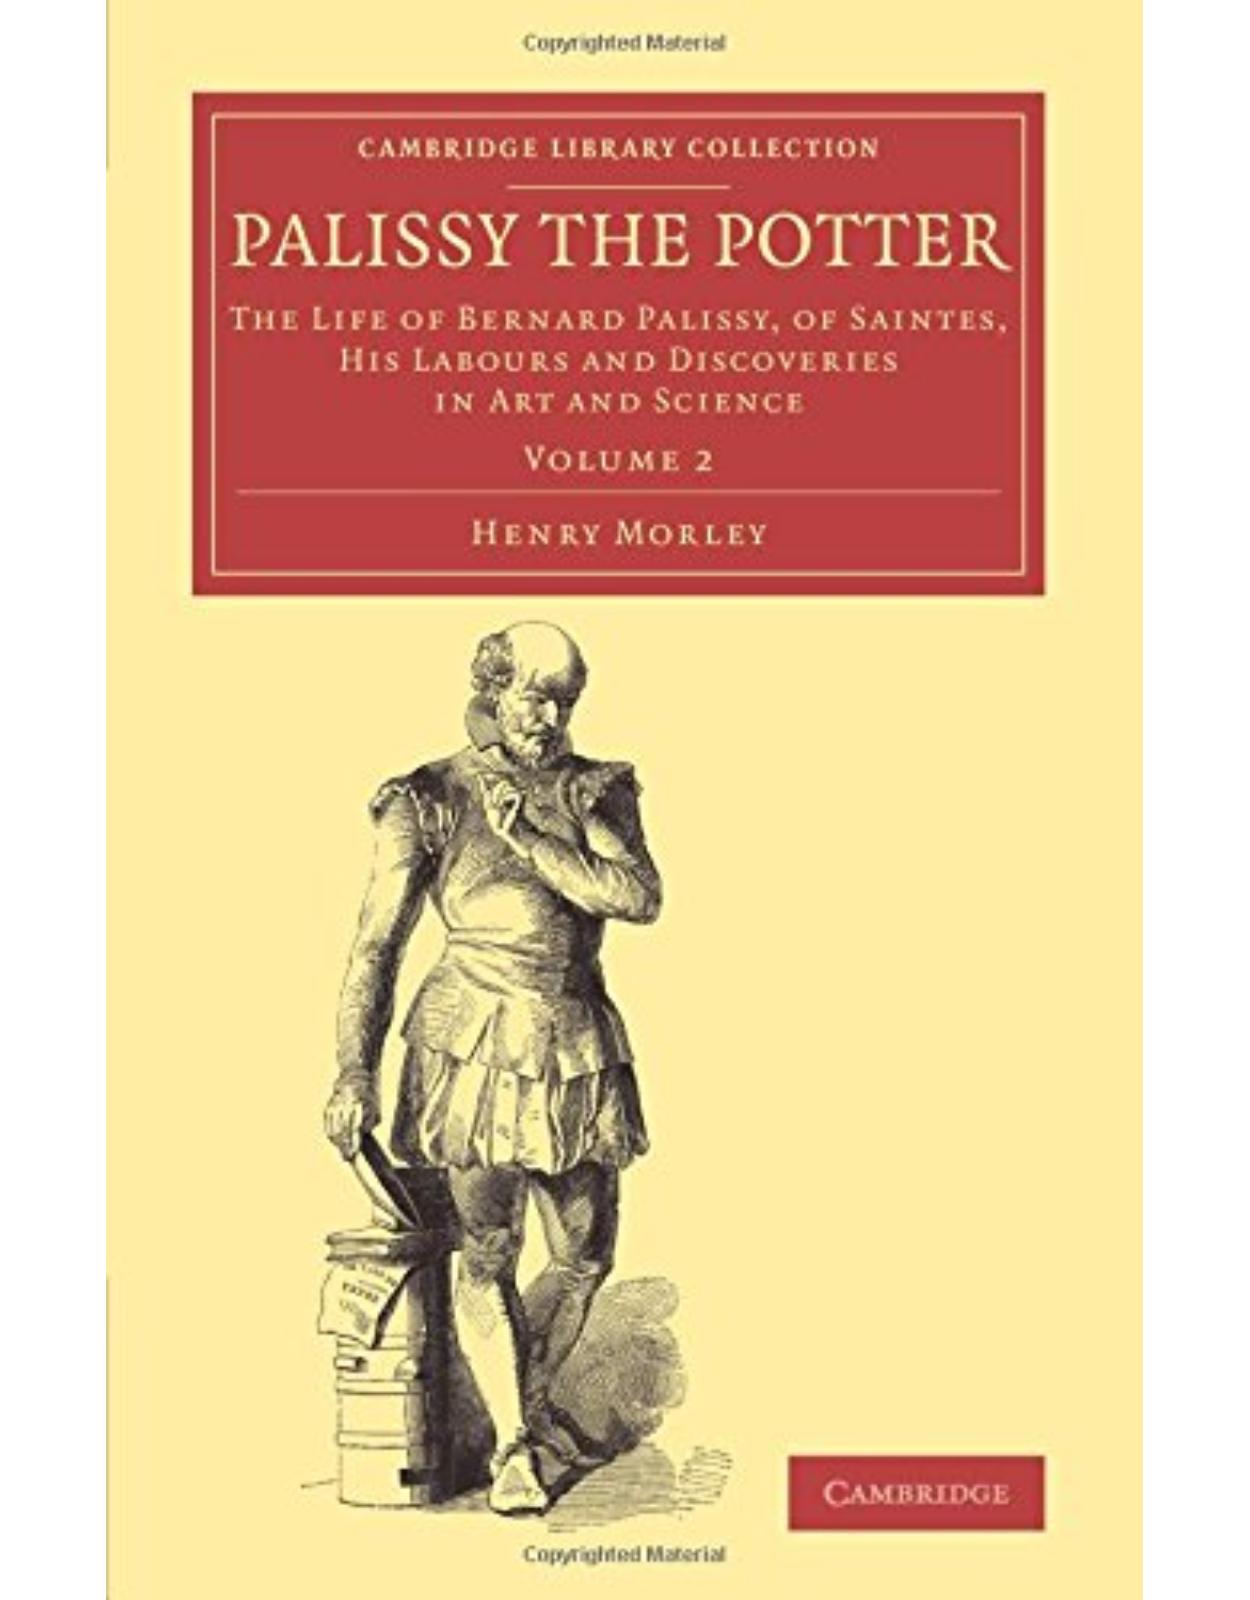 Palissy the Potter: The Life of Bernard Palissy, of Saintes, his Labours and Discoveries in Art and Science (Volume 2)